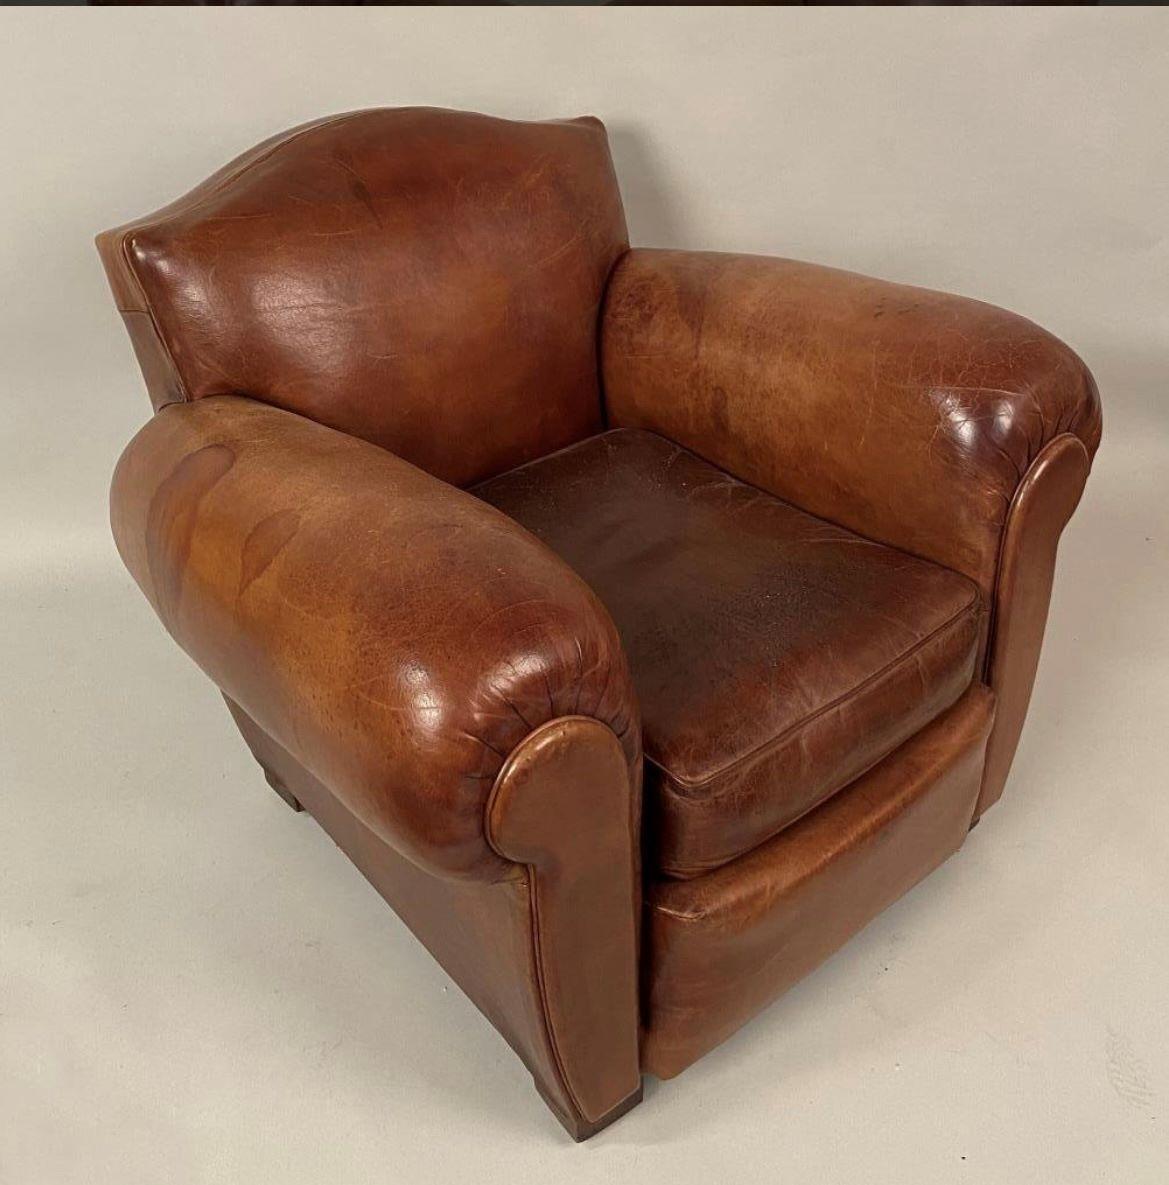 A nice pair of French 1930’s leather “Moustache” club chairs with overstuffed arms and loose seat cushions. Leather is supple with expected wear for the age and use. (See detail photos for imperfections). 